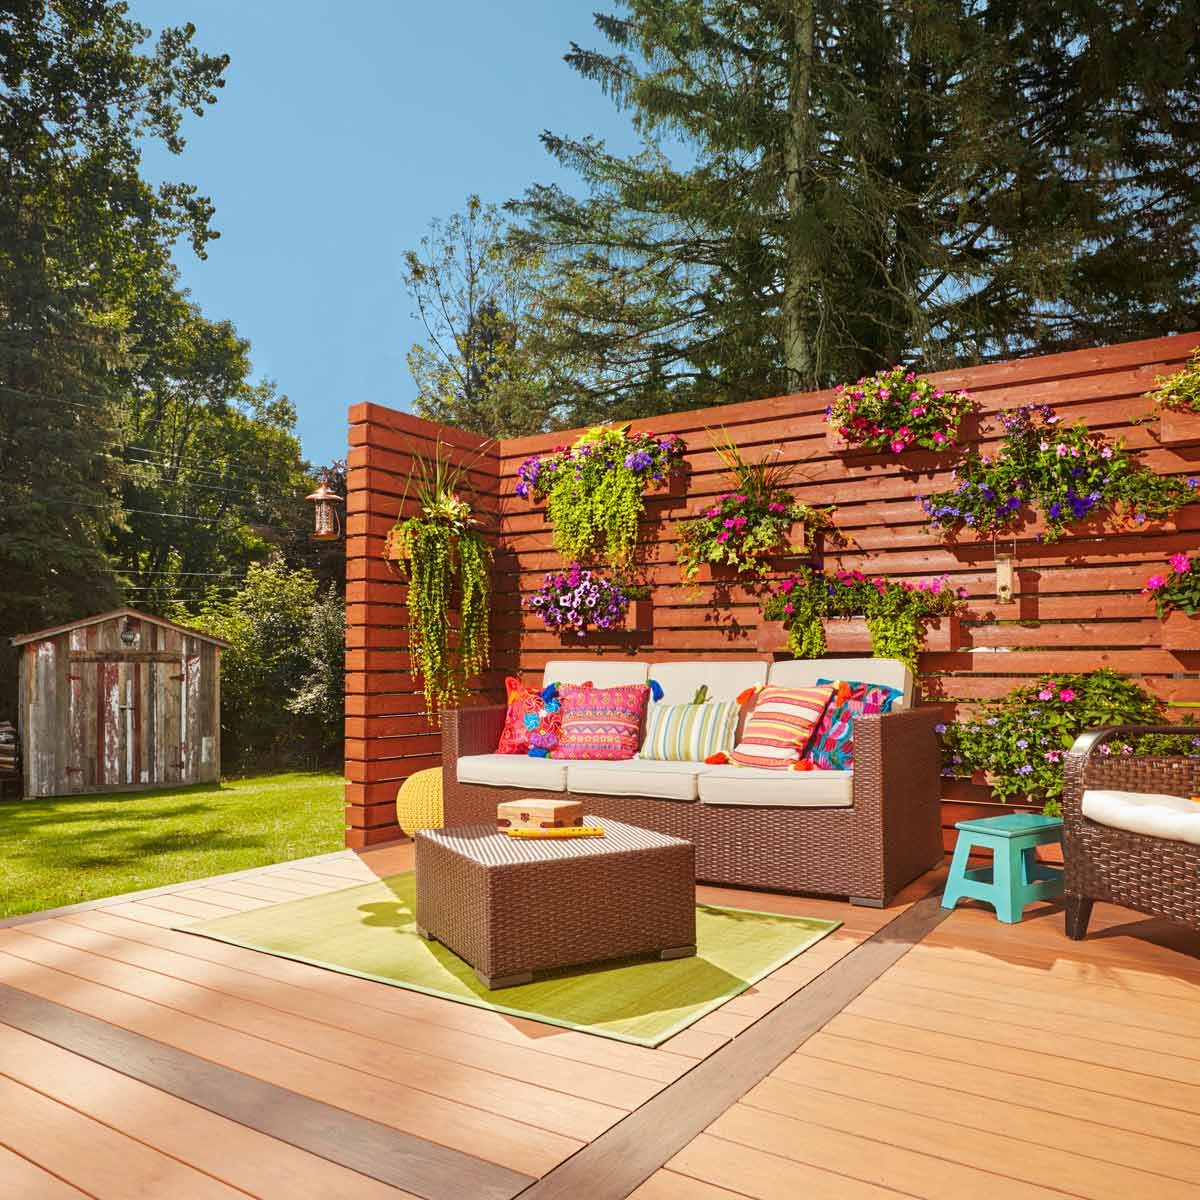 Can I have a garden on my deck?